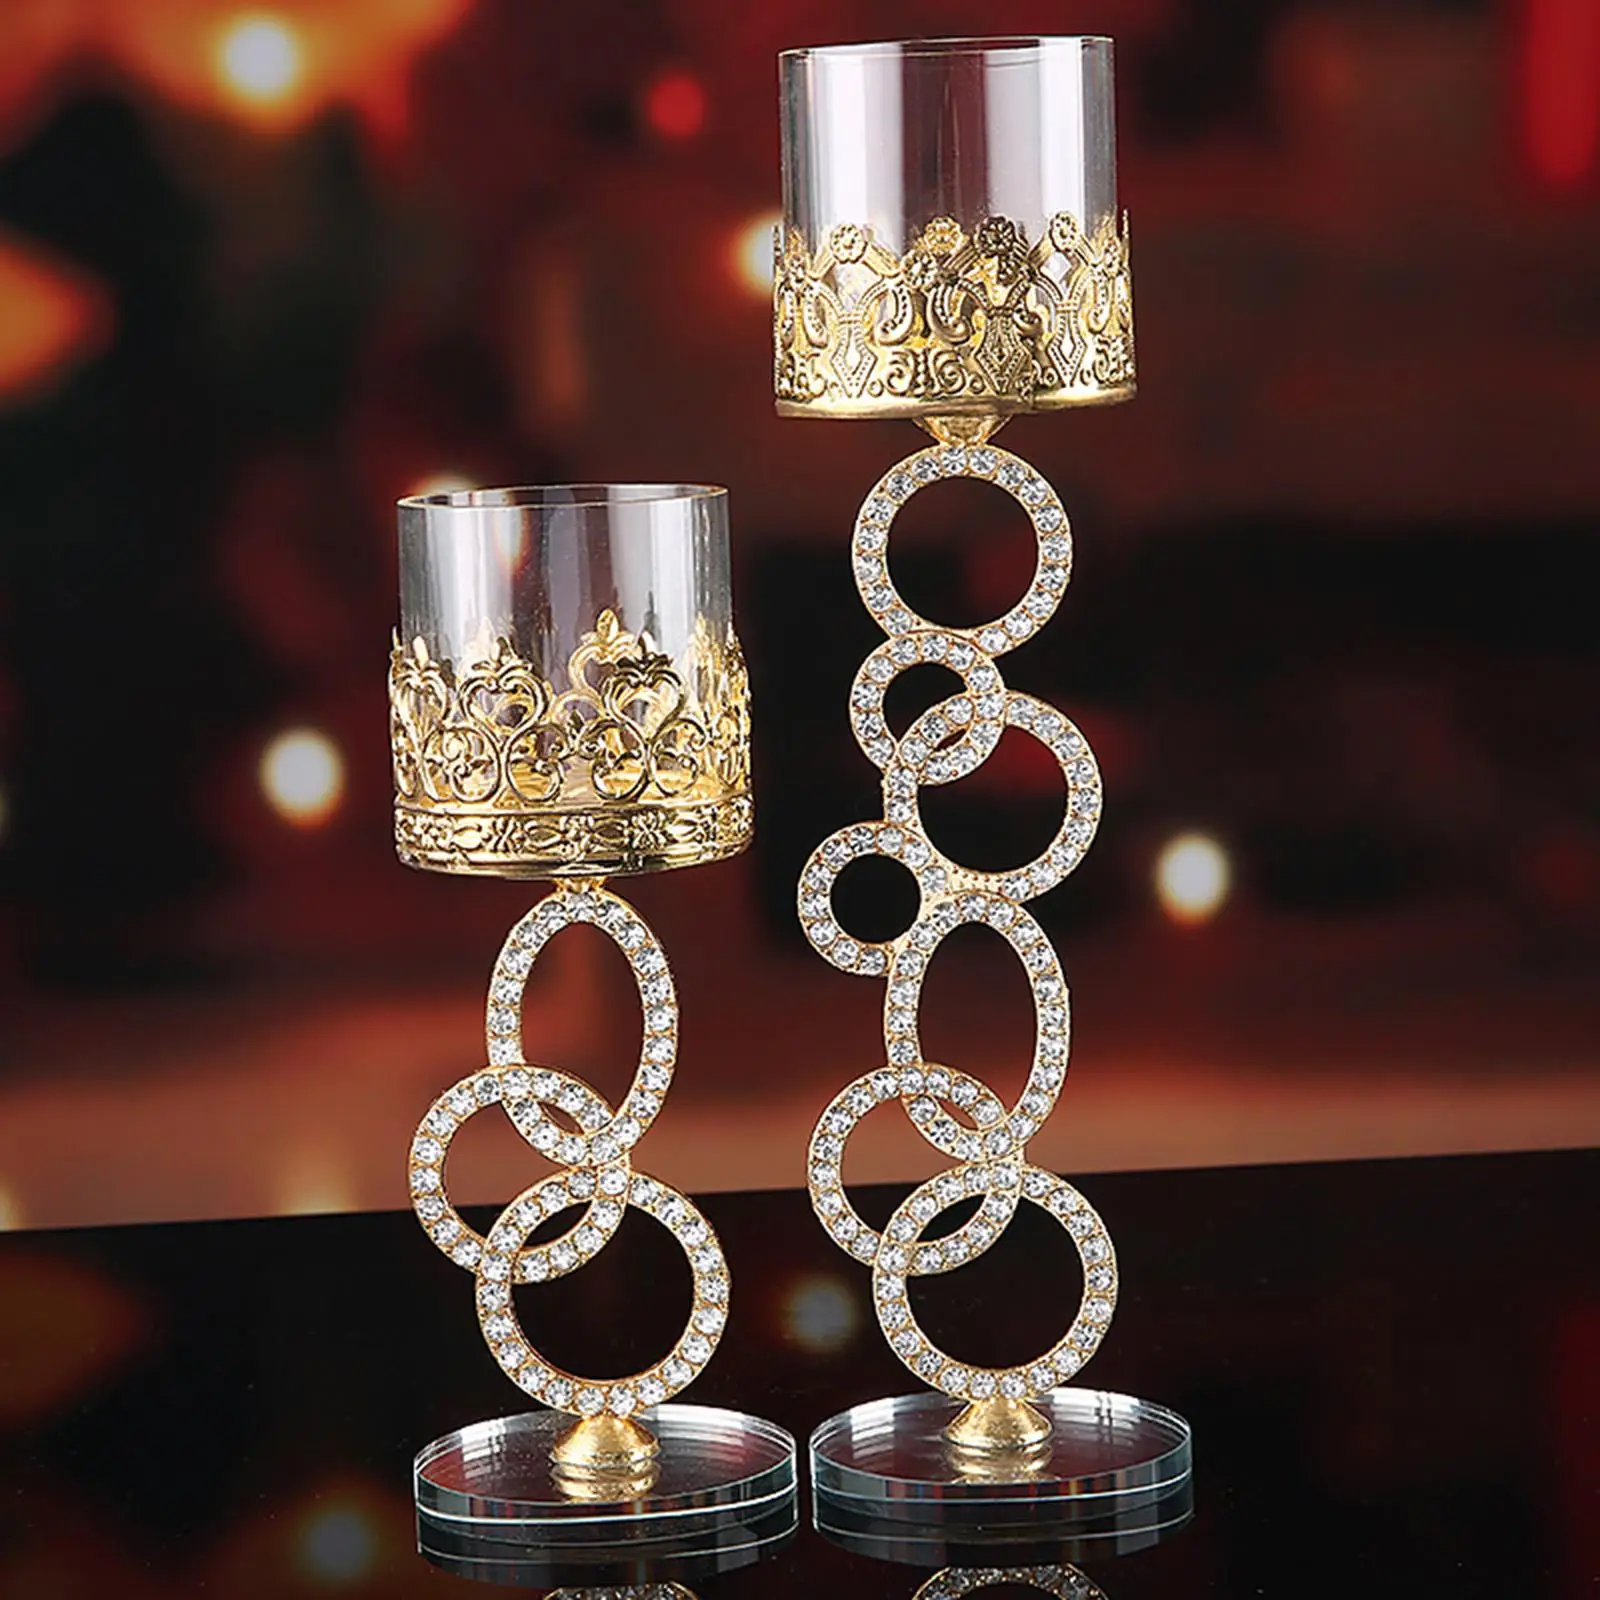 Glass Crystal Candlestick Light Luxury Event Party Decorative Candle Holders